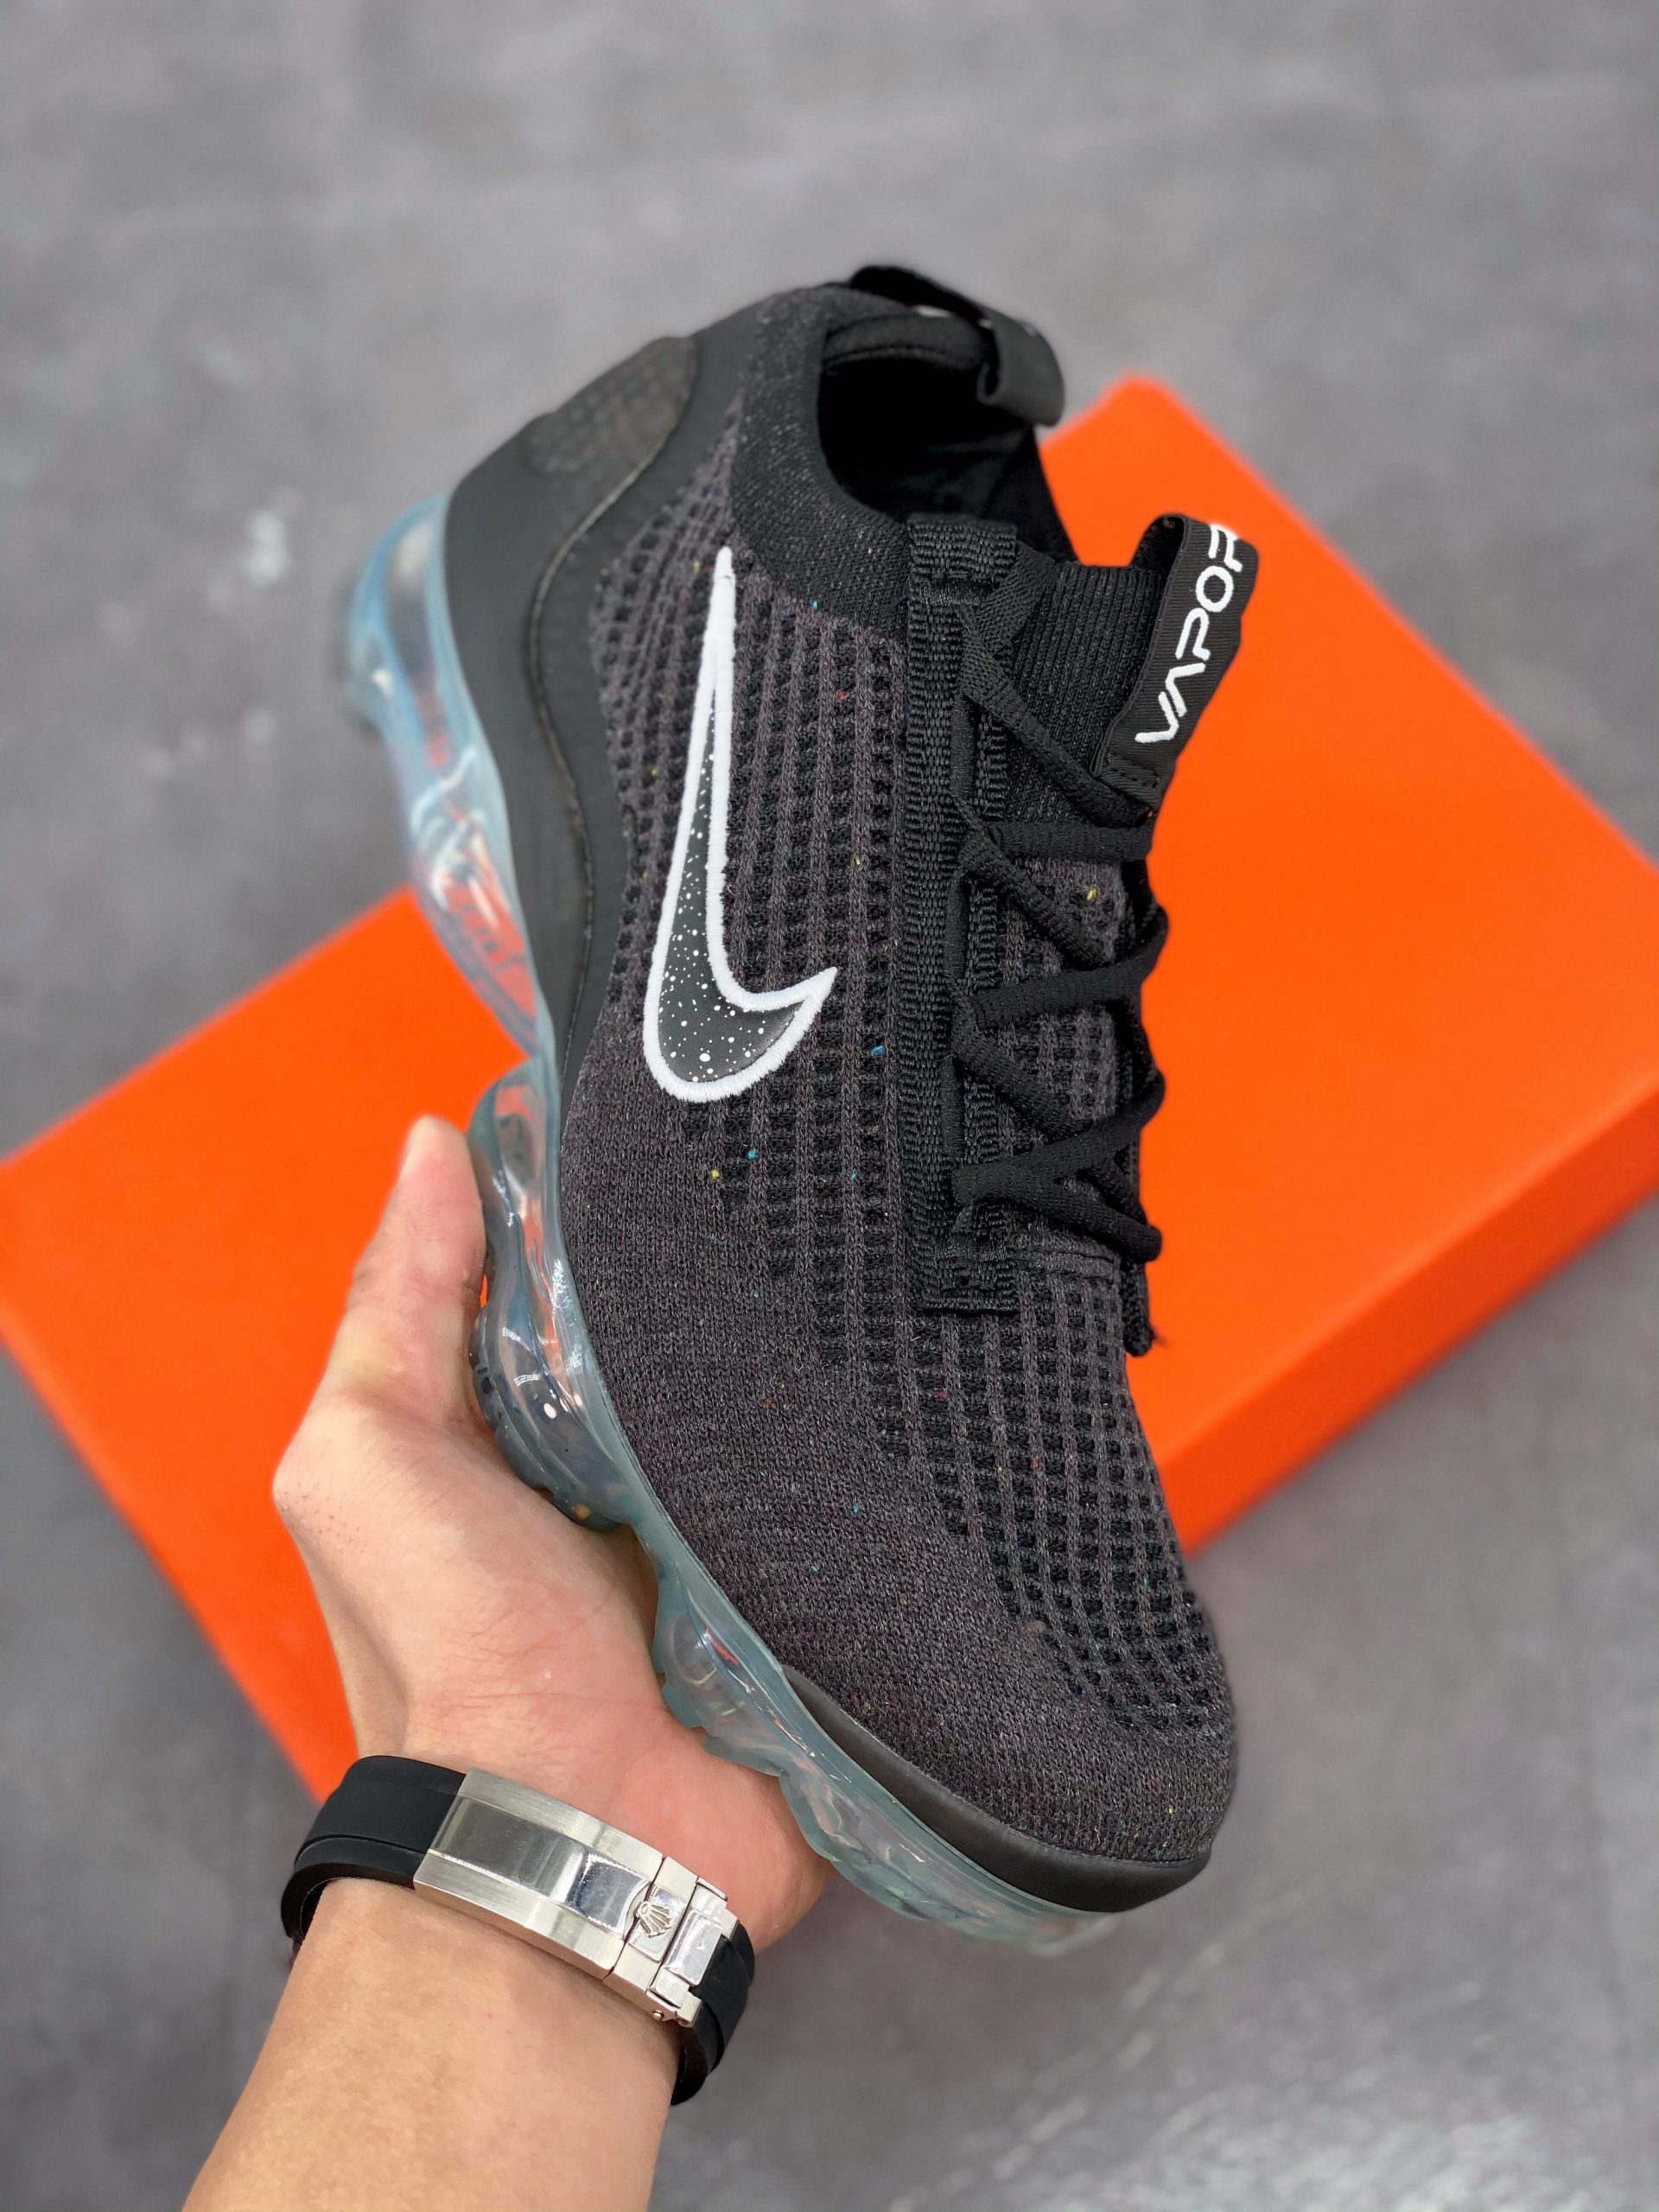 Nike Vapormax Flyknit 2021 Black Speckled DC4112-002 Shoes